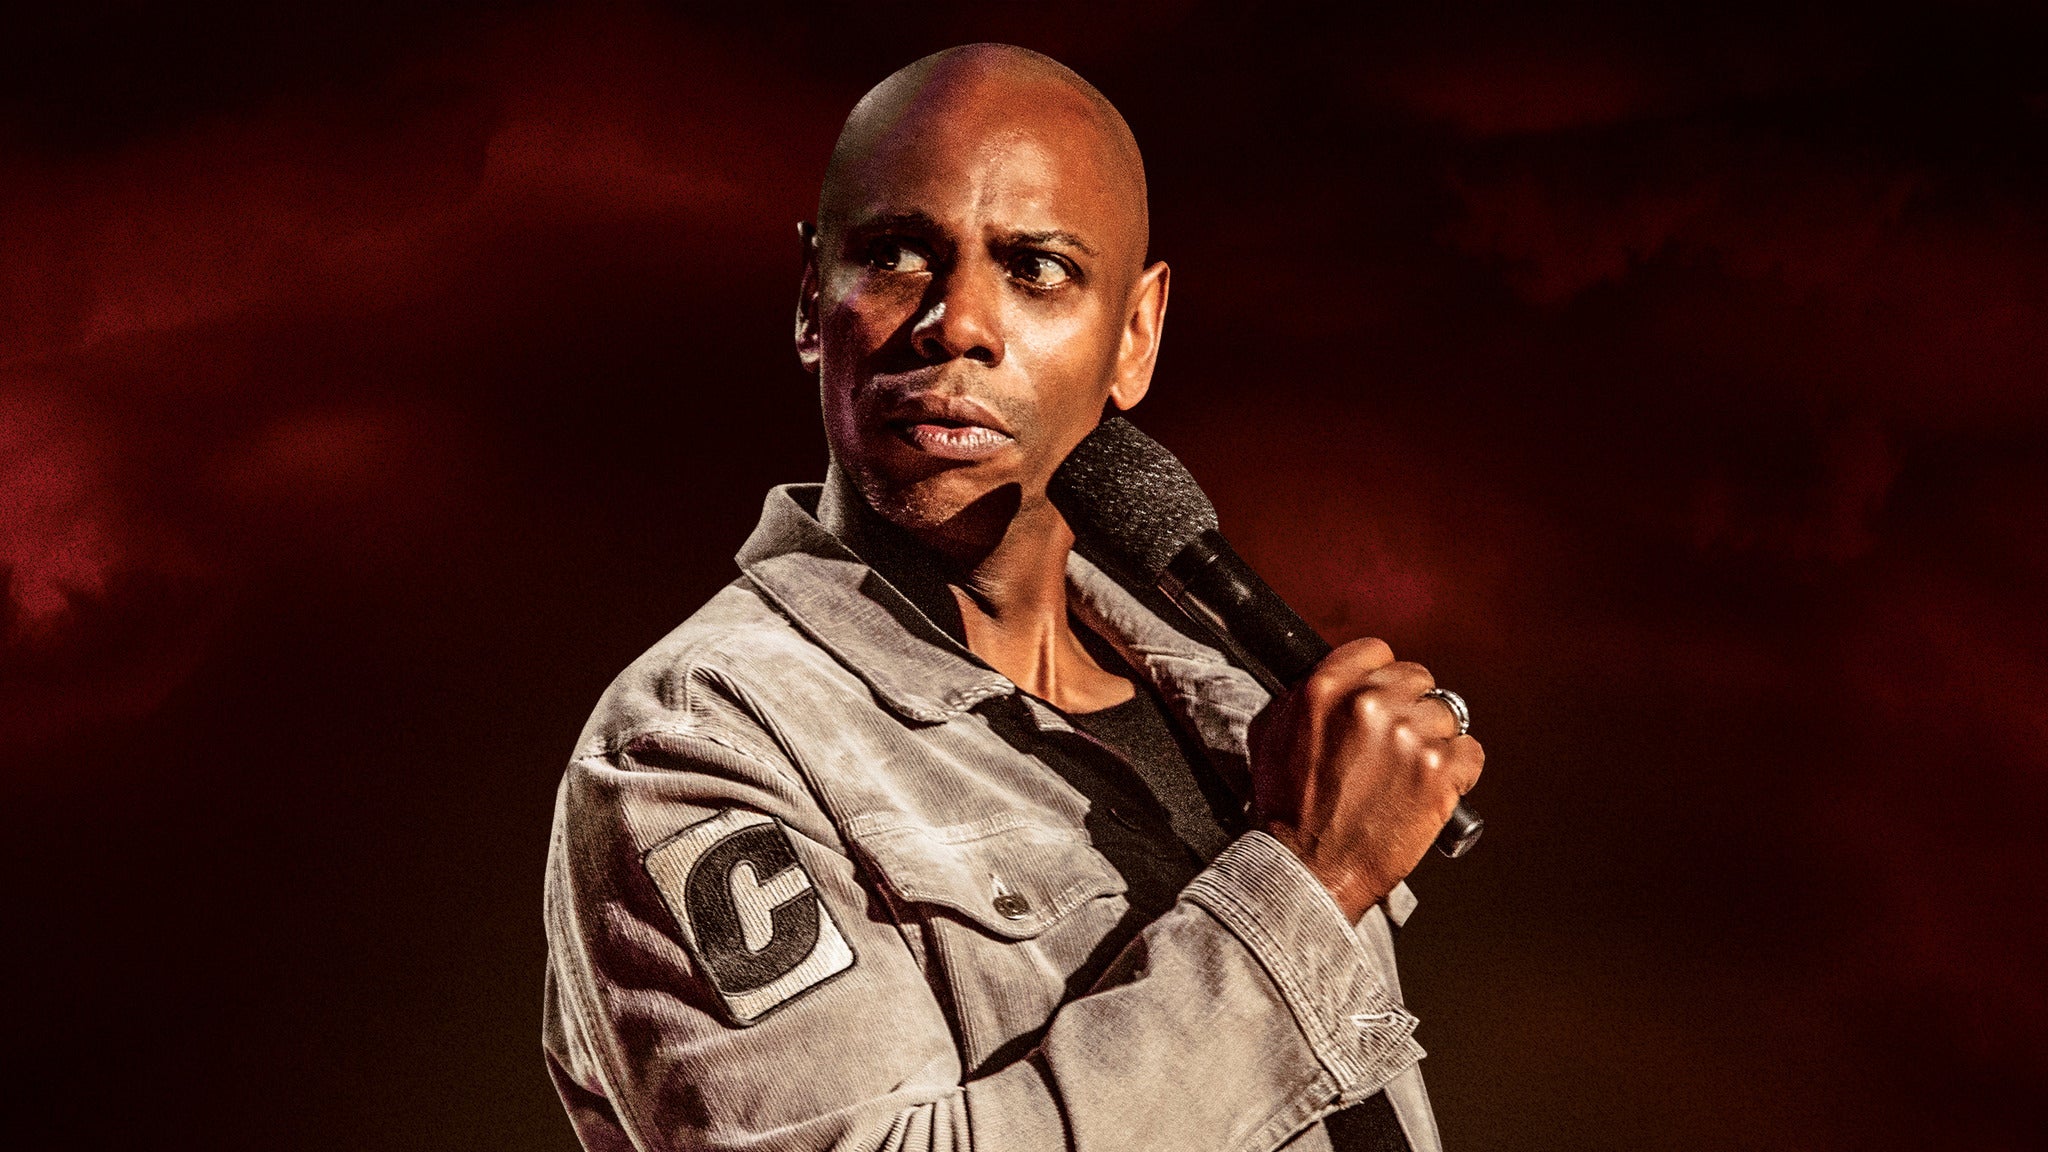 "Untitled" Dave Chappelle Documentary in Hollywood promo photo for Official Platinum presale offer code